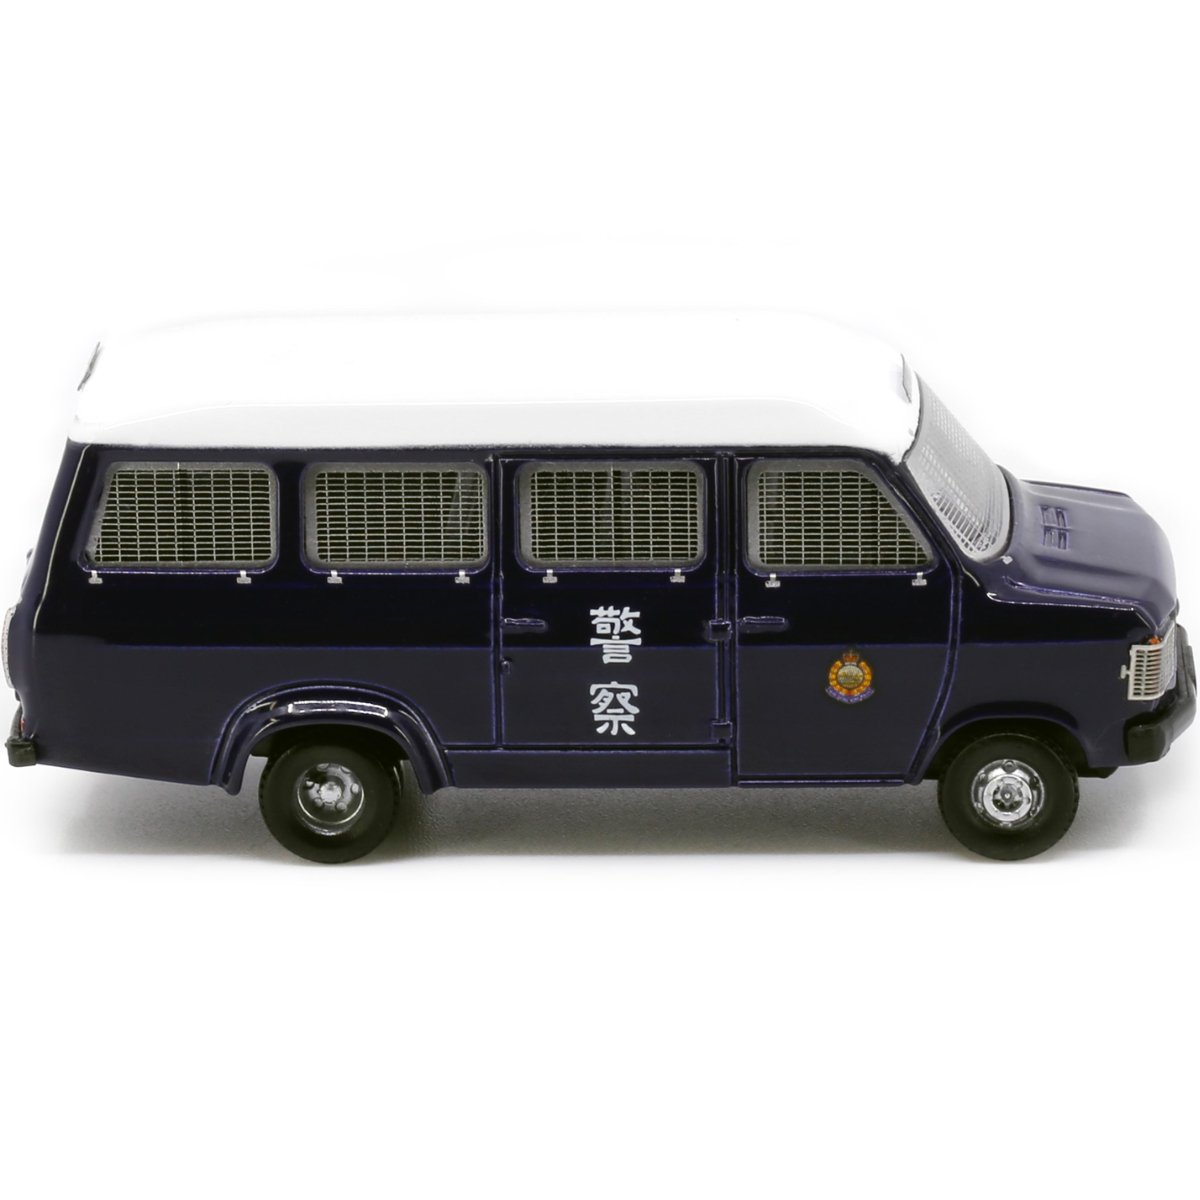 Tiny Models 1980's Police Van - Without Beacon (1:76 Scale) - Phillips Hobbies